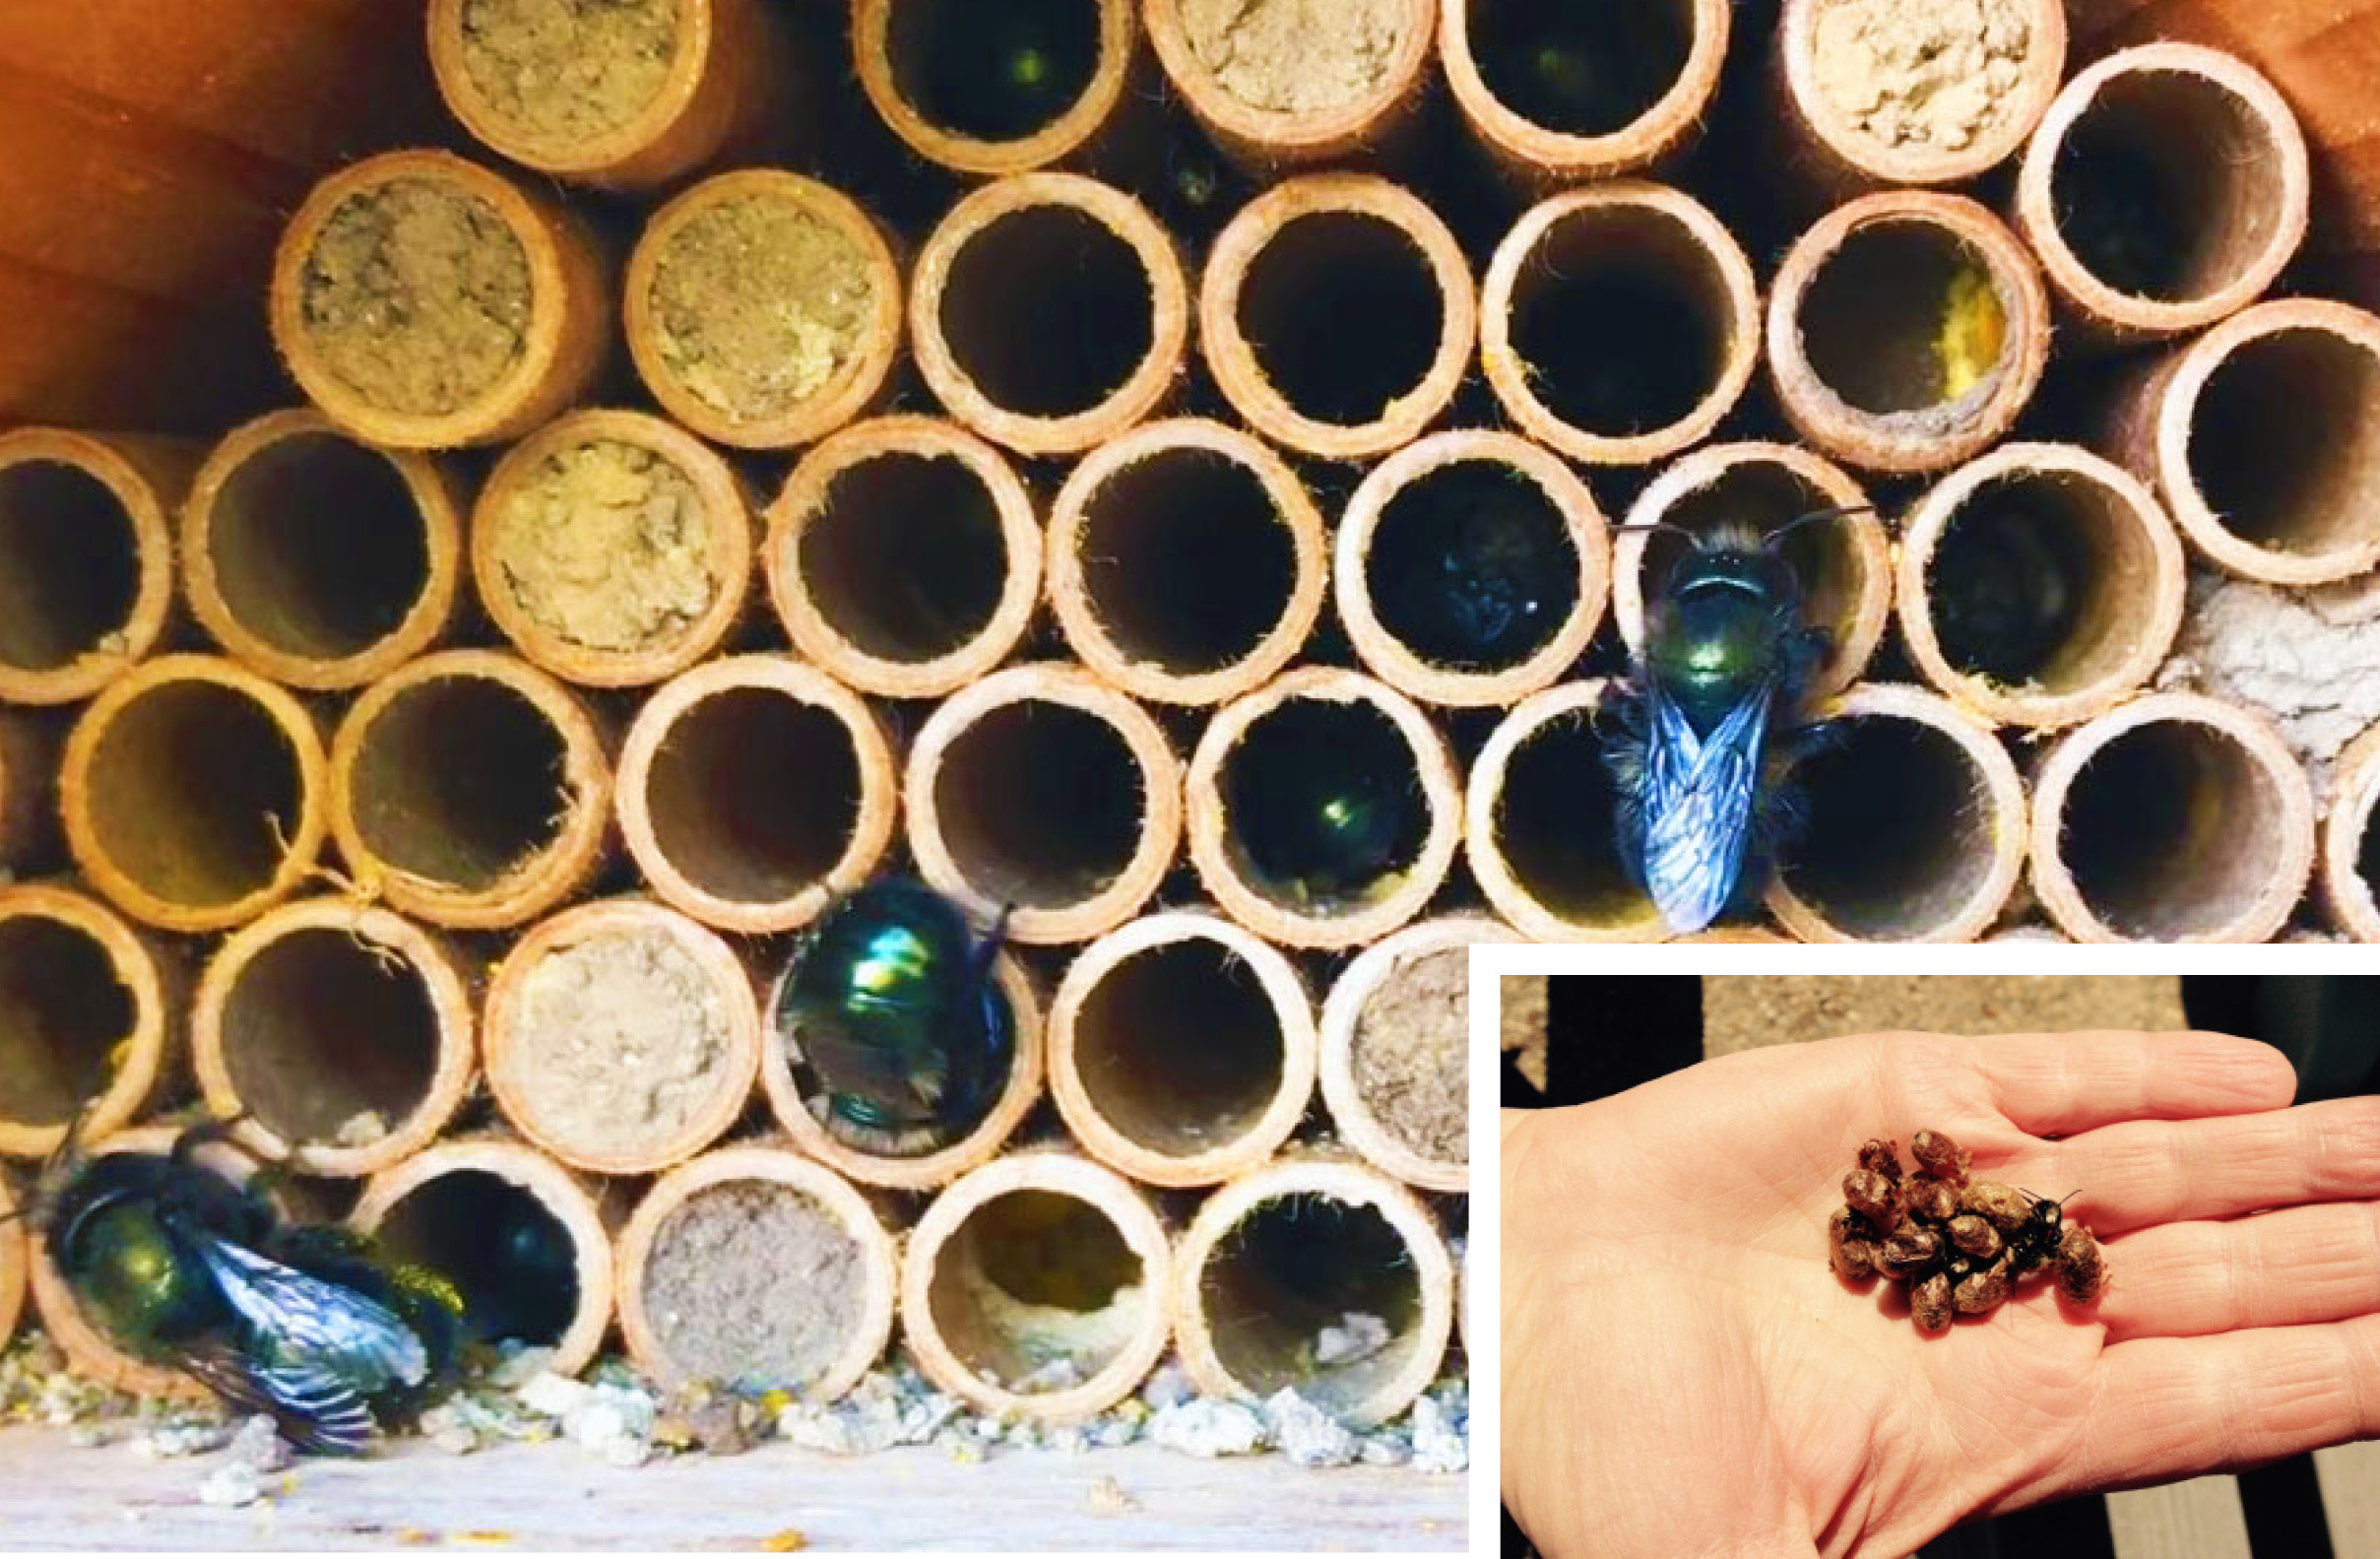 A number of small tubes, some empty, some with plugs. Mason bees crawl over the tubes. A hand holds out a mason bee.